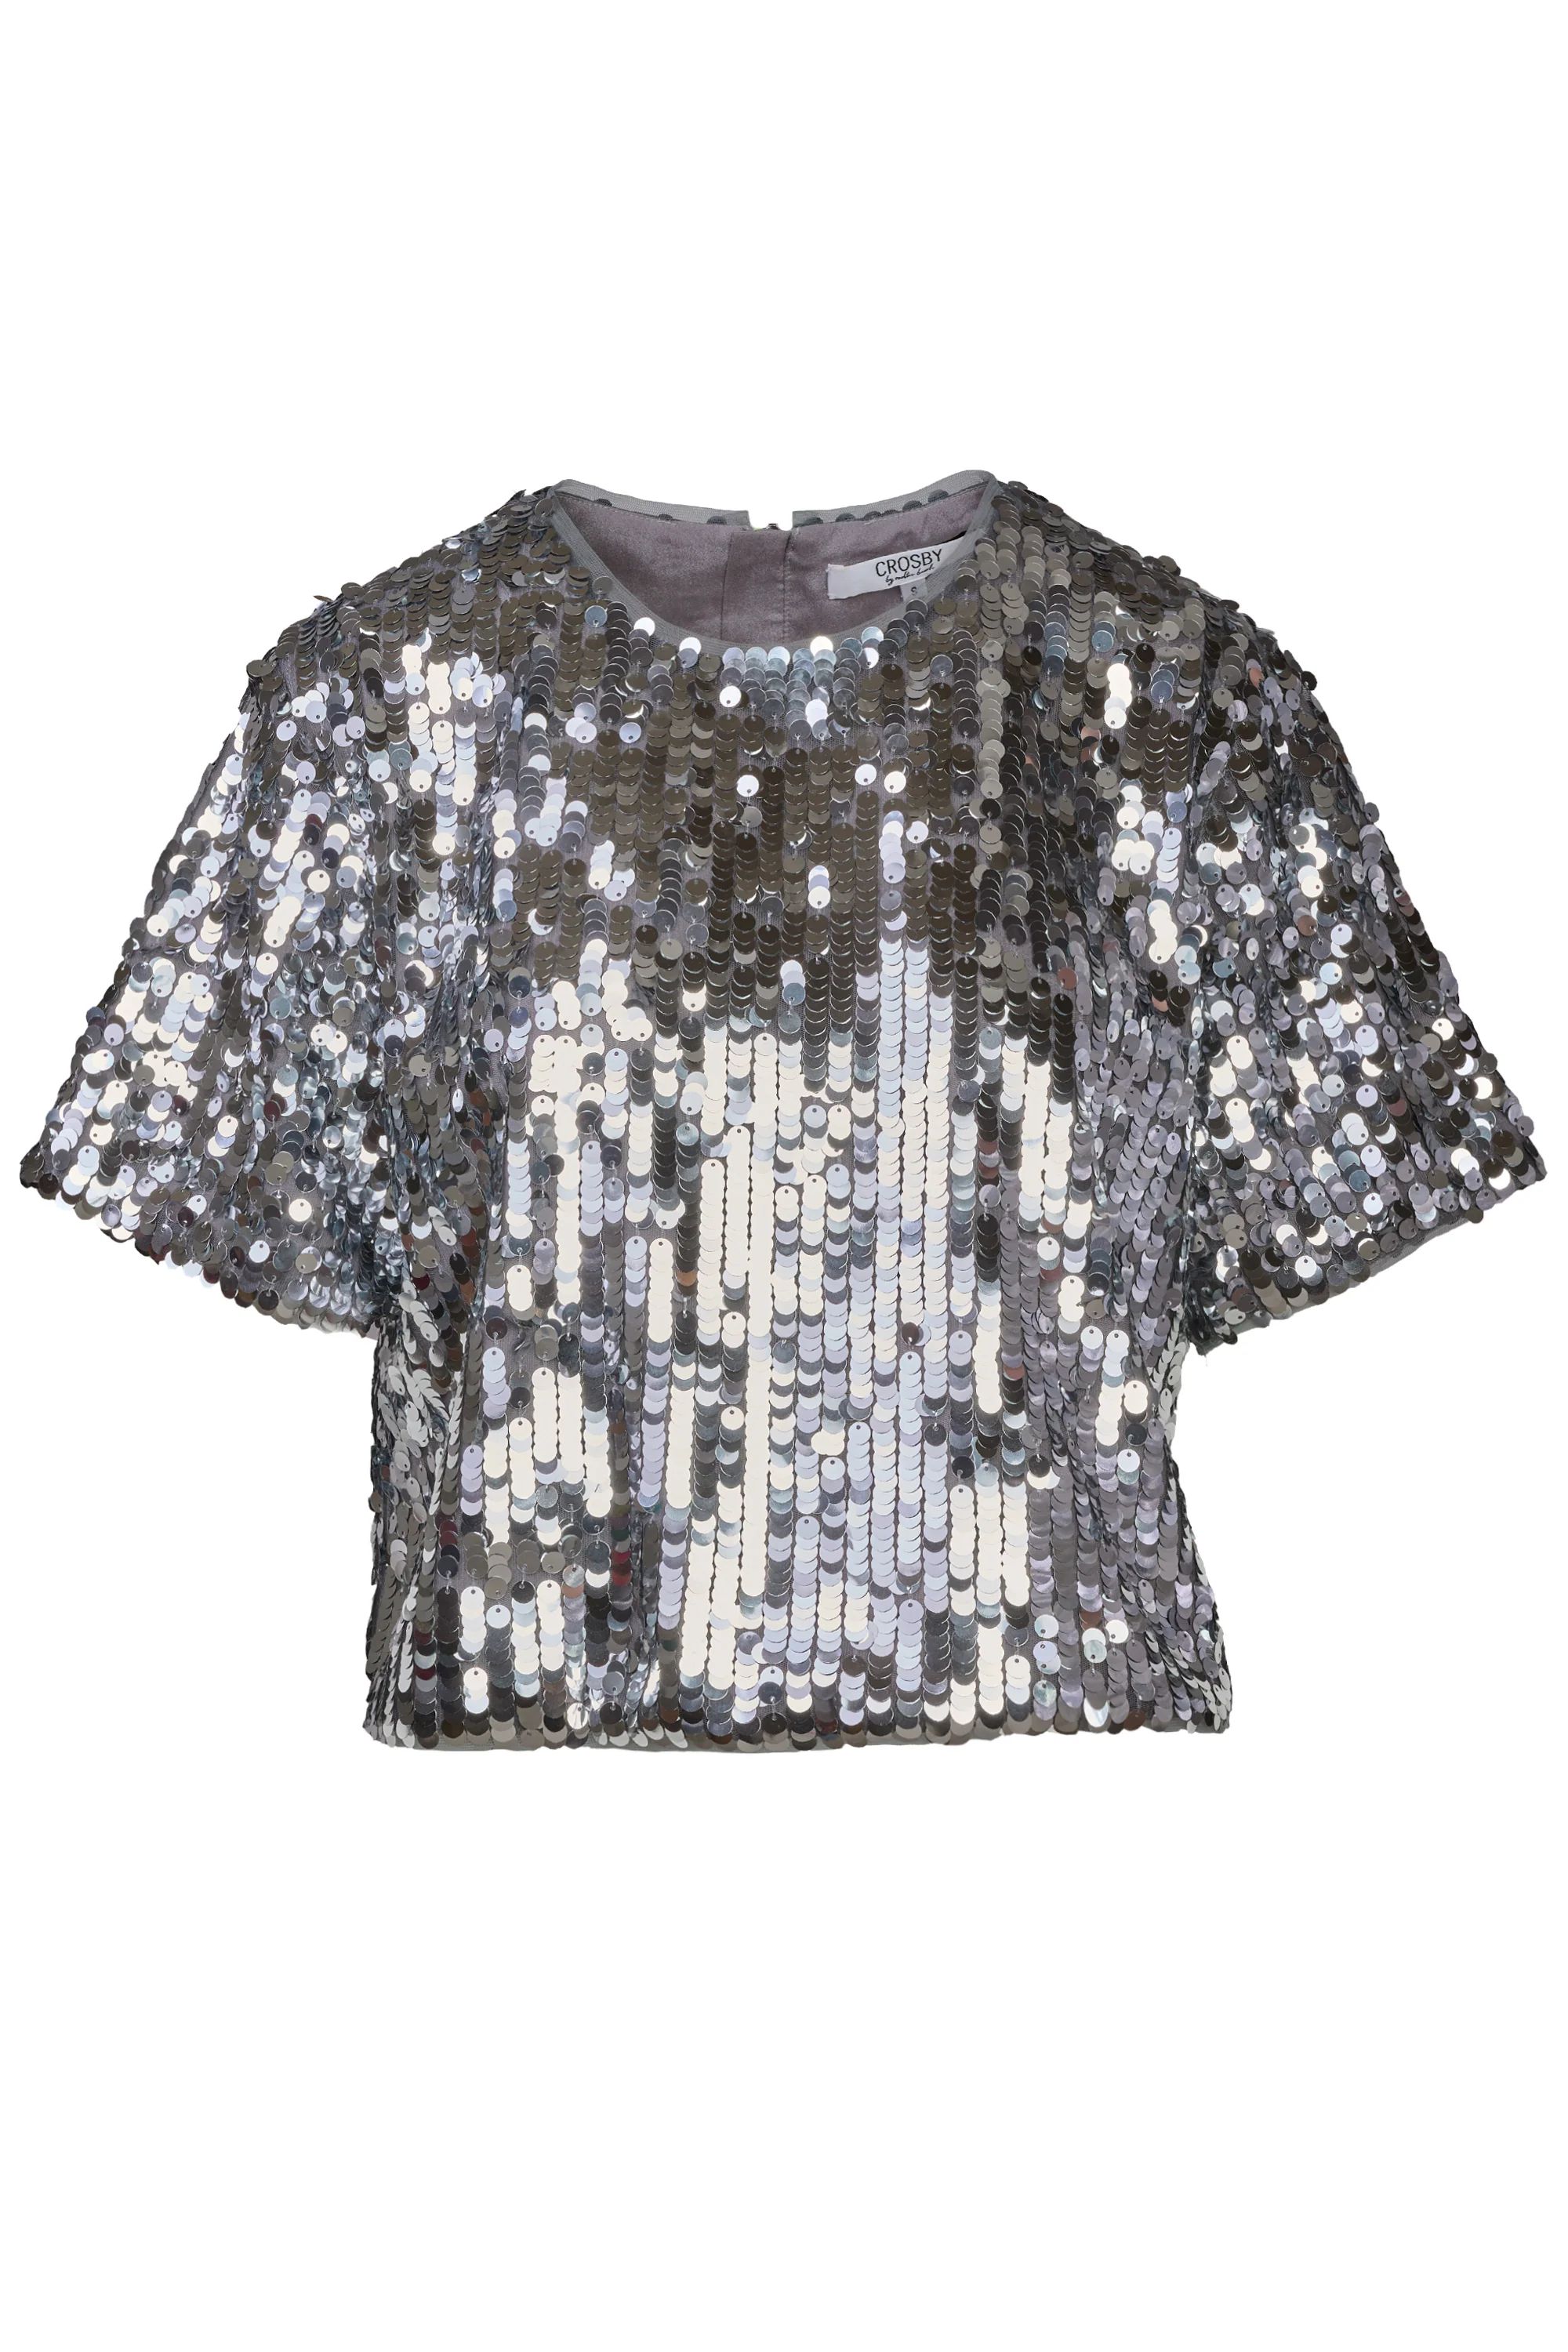 Maxwell Tee in Disco Sequin | CROSBY by Mollie Burch | CROSBY by Mollie Burch